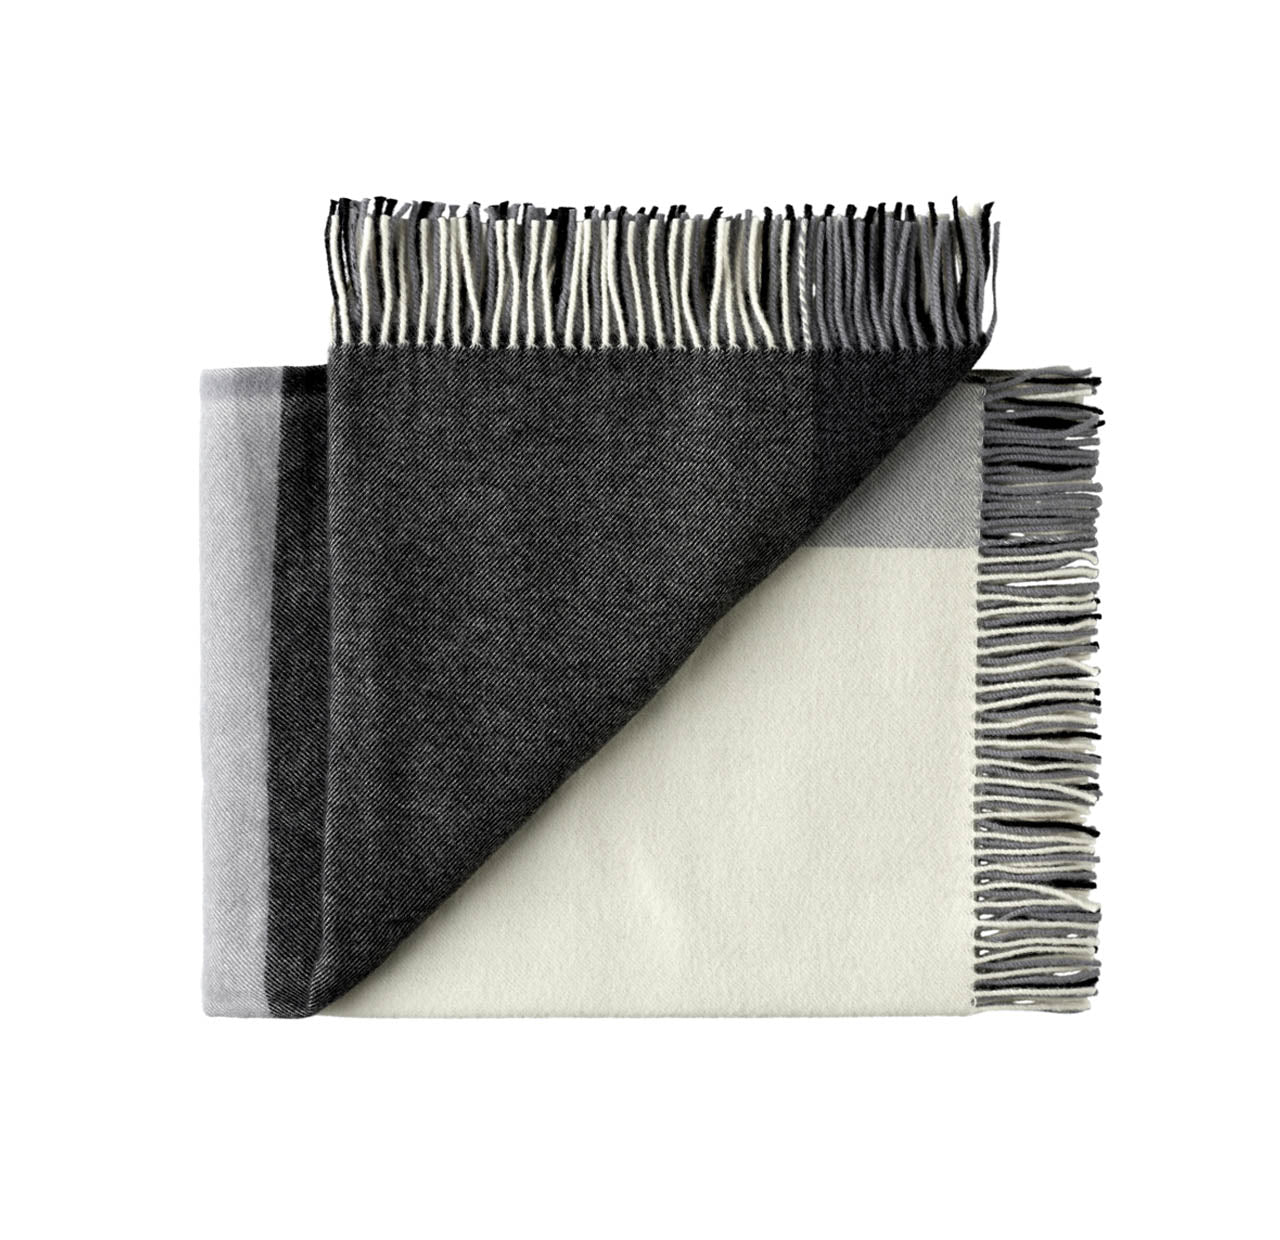 Wool Throw Roxburgh from Weave Home Charcoal Grey colour block pattern. New Zealand